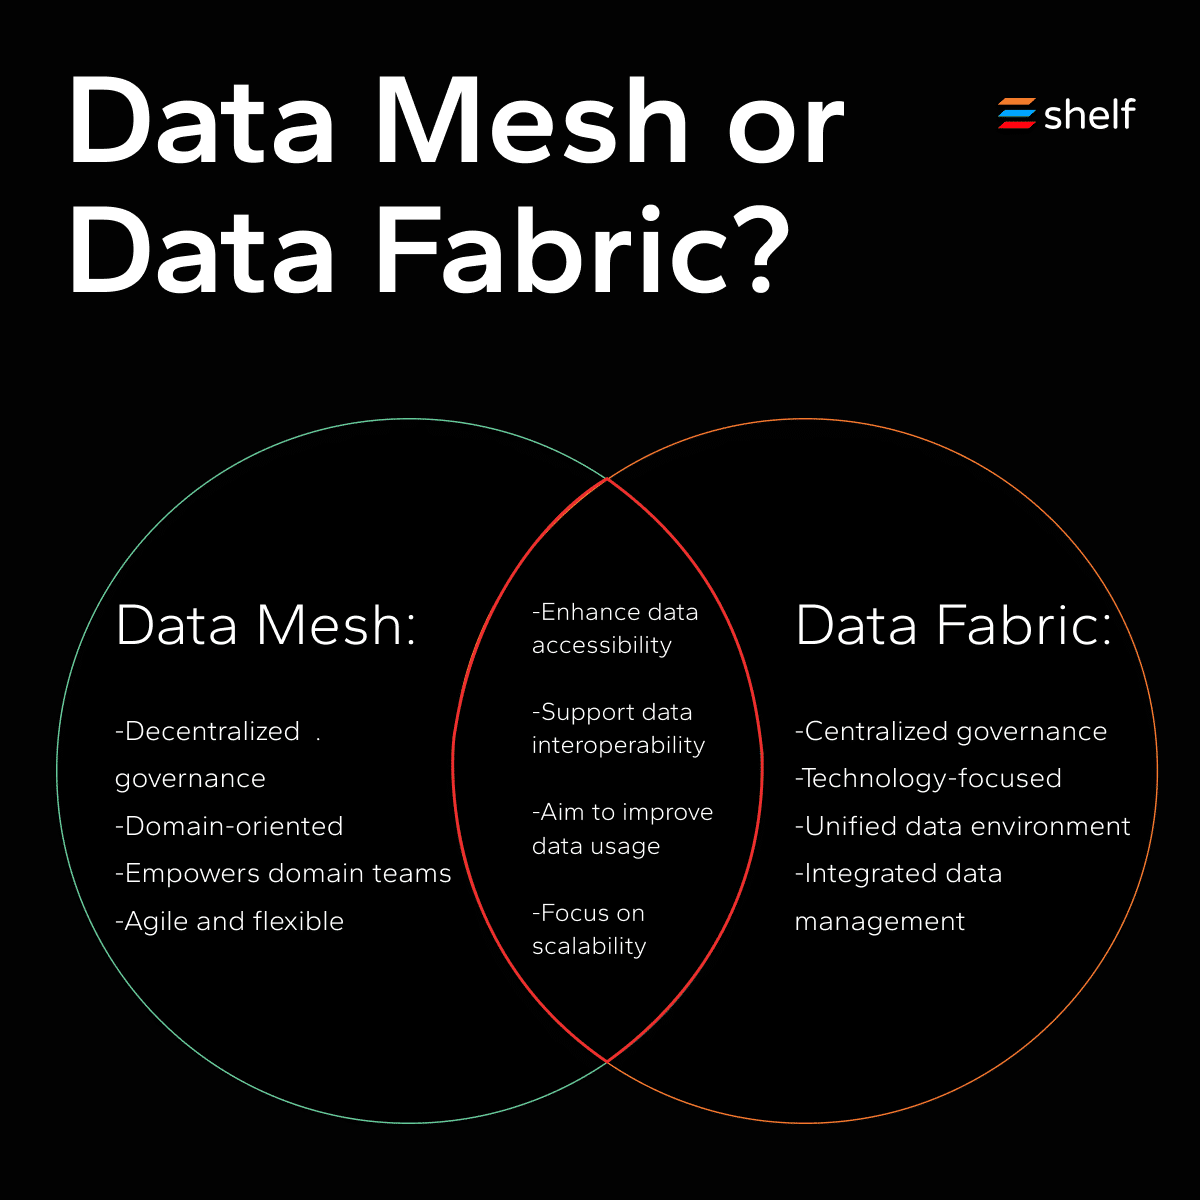 Data Mesh or Data Fabric? Choosing the Right Data Architecture: image 3